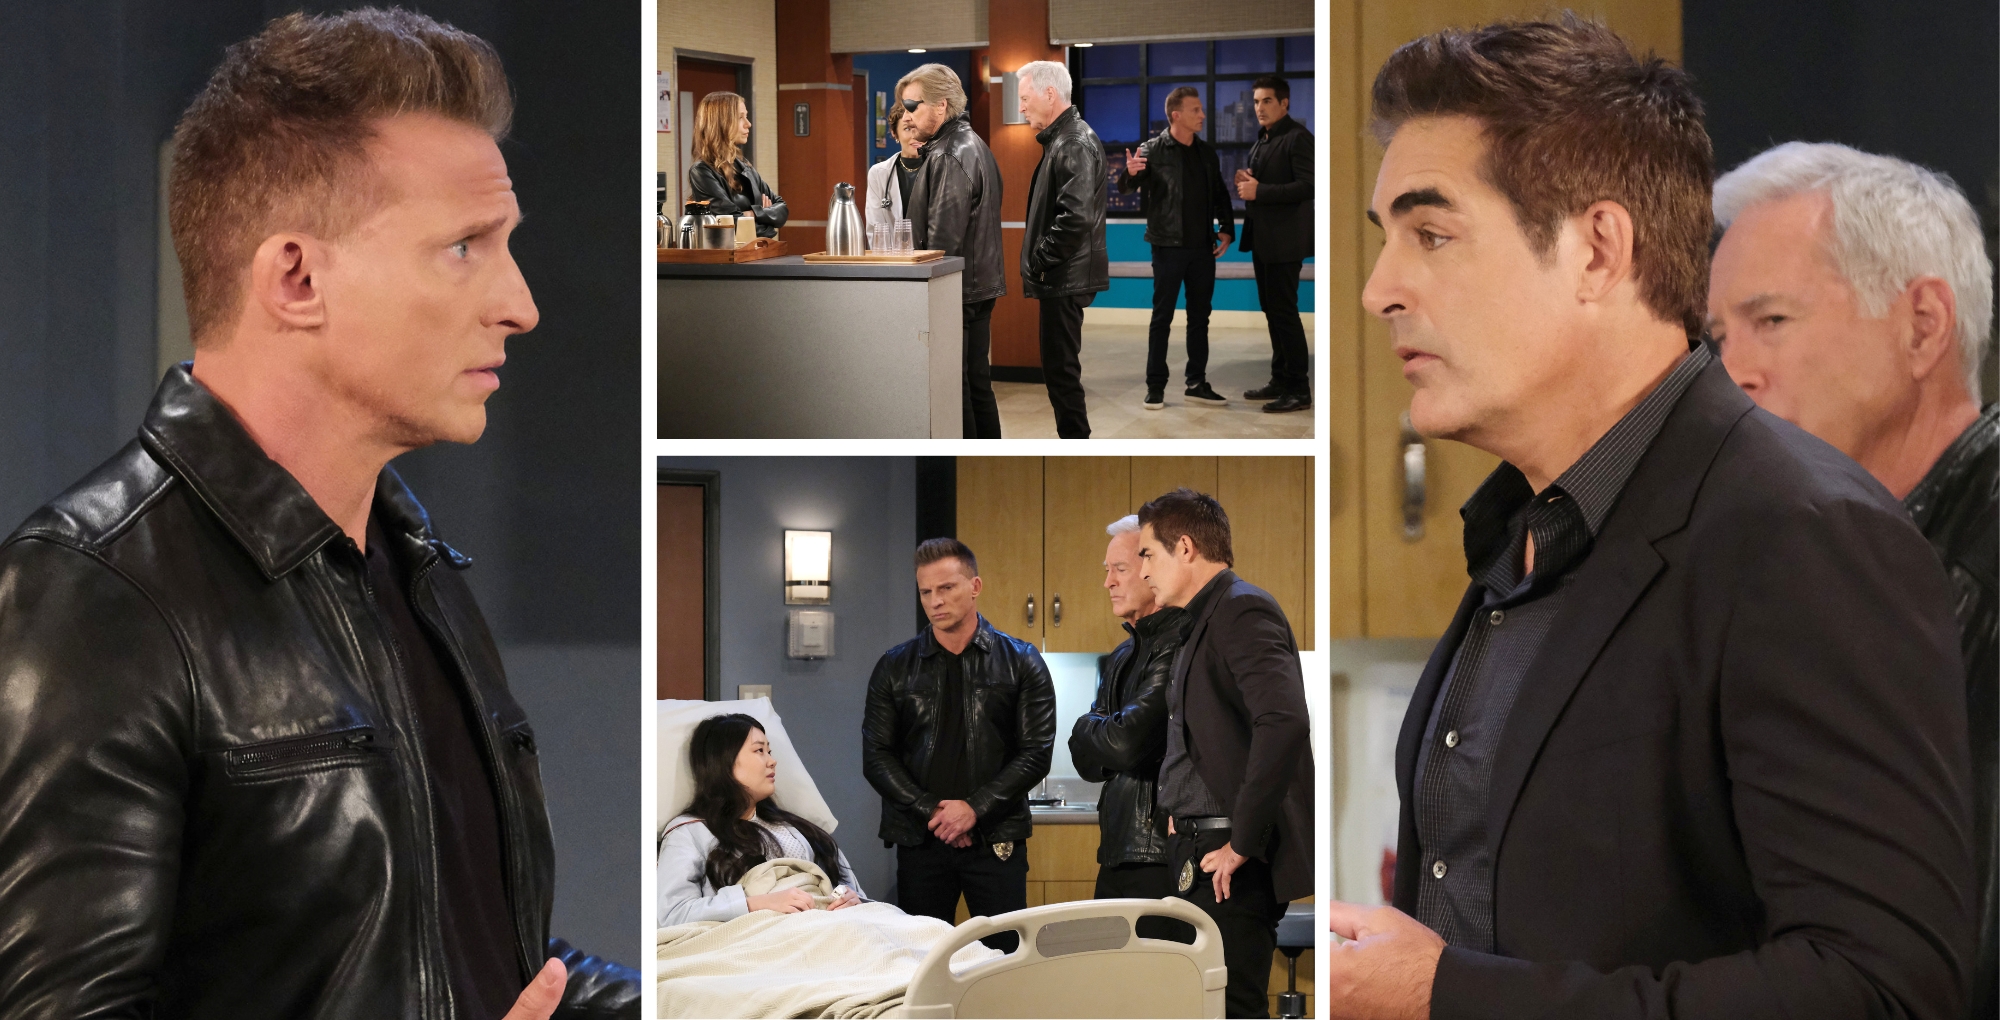 Days of our Lives spoilers photos show Harris, Rafe and John talk to Wendy at the hospital.